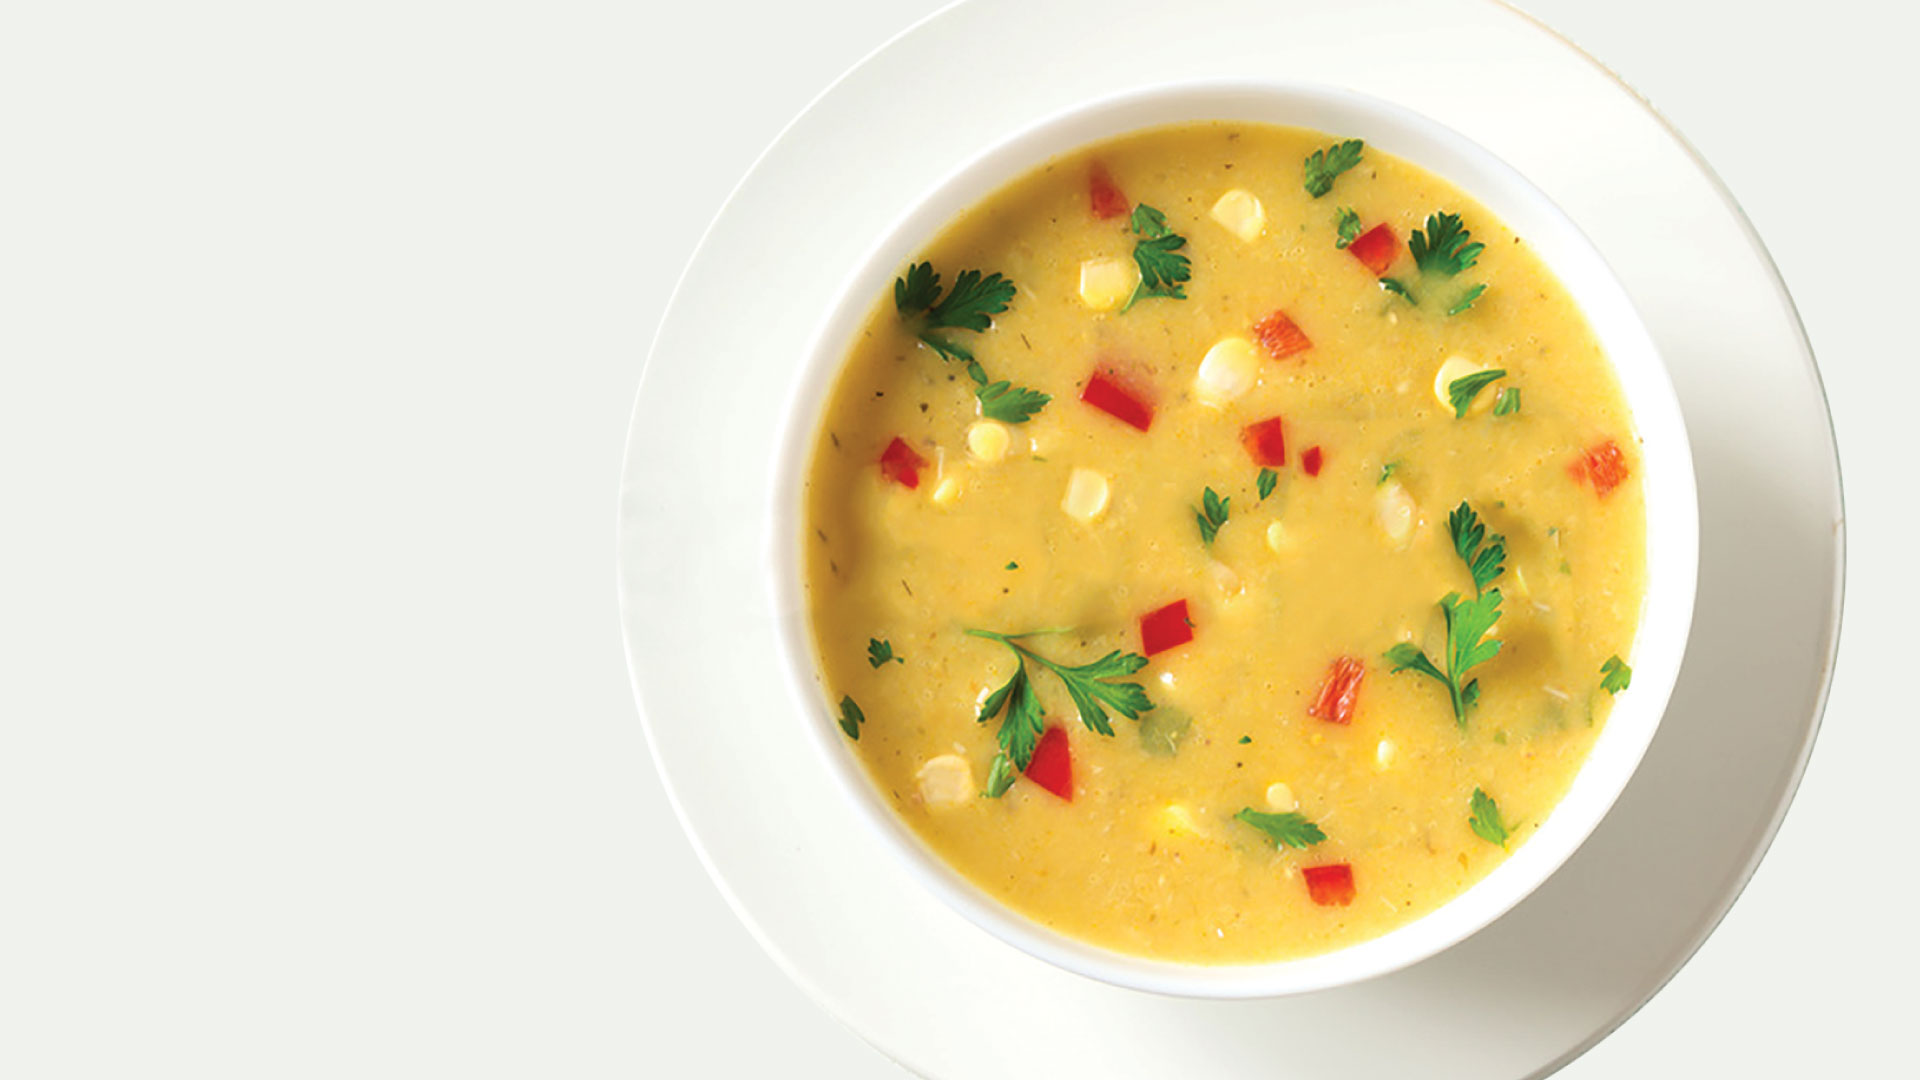 Featured Image for “Superfood Corn Chowder”